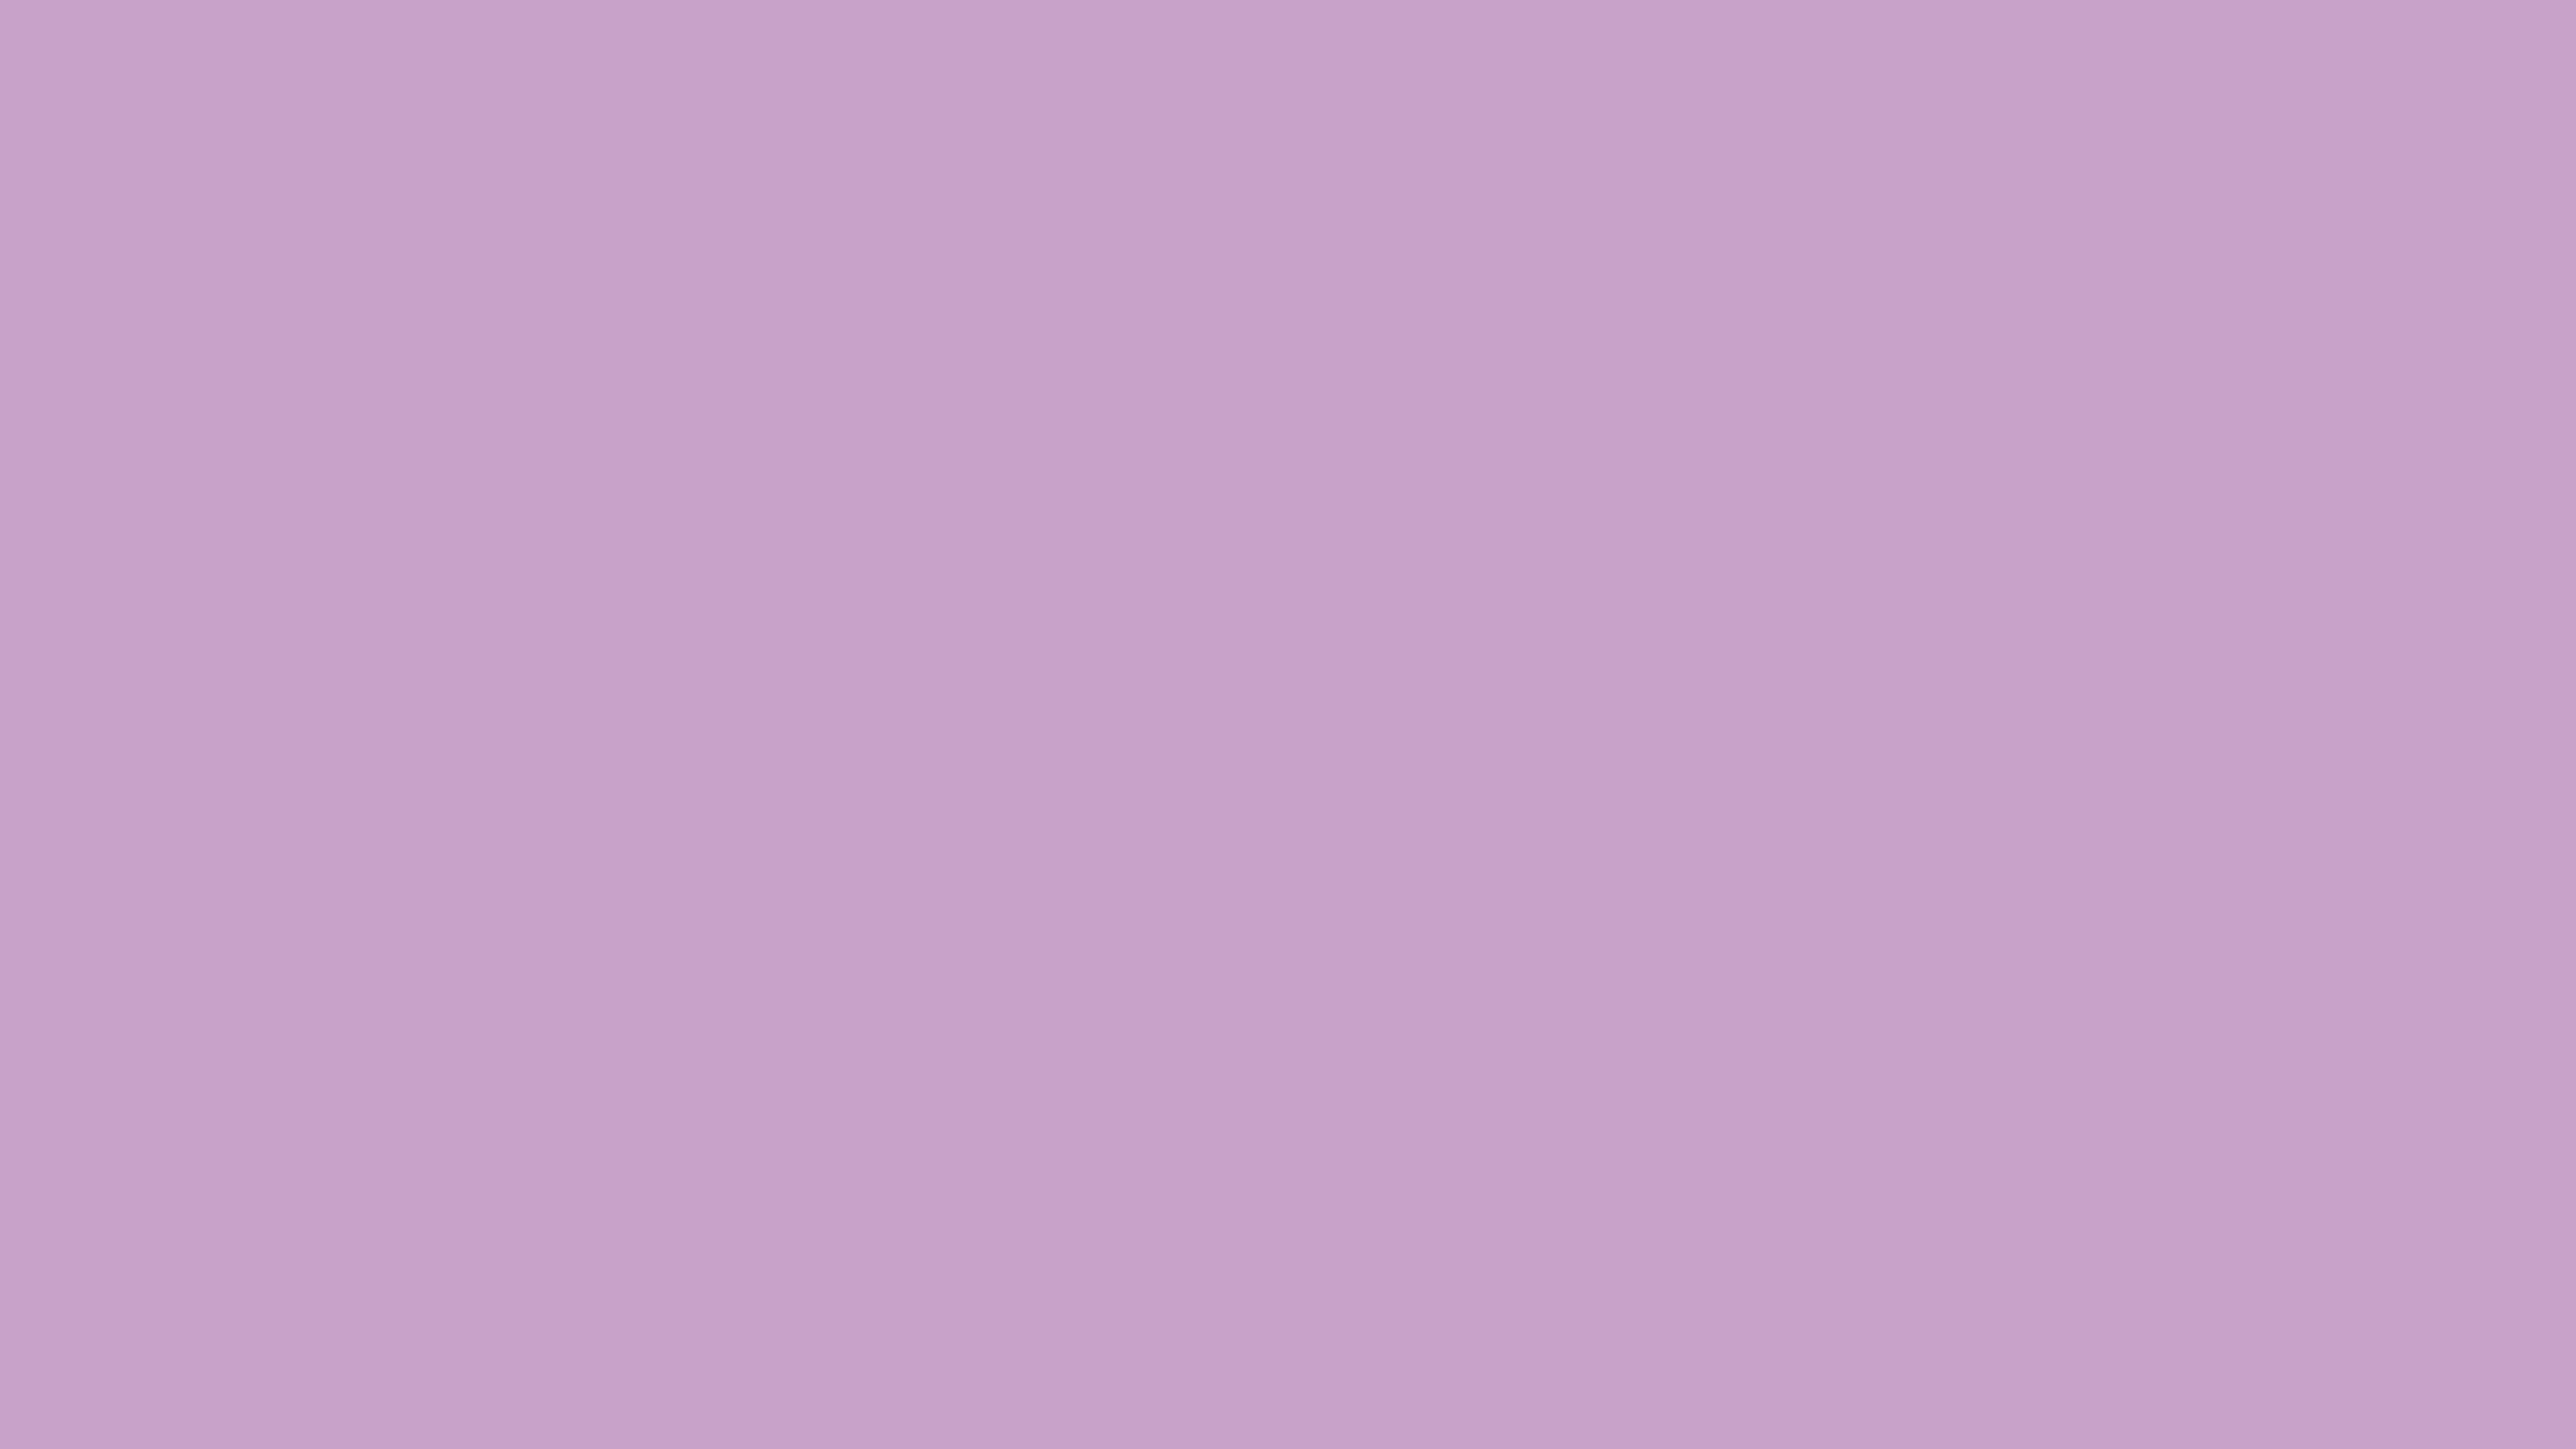 7680x4320 Lilac Solid Color Background